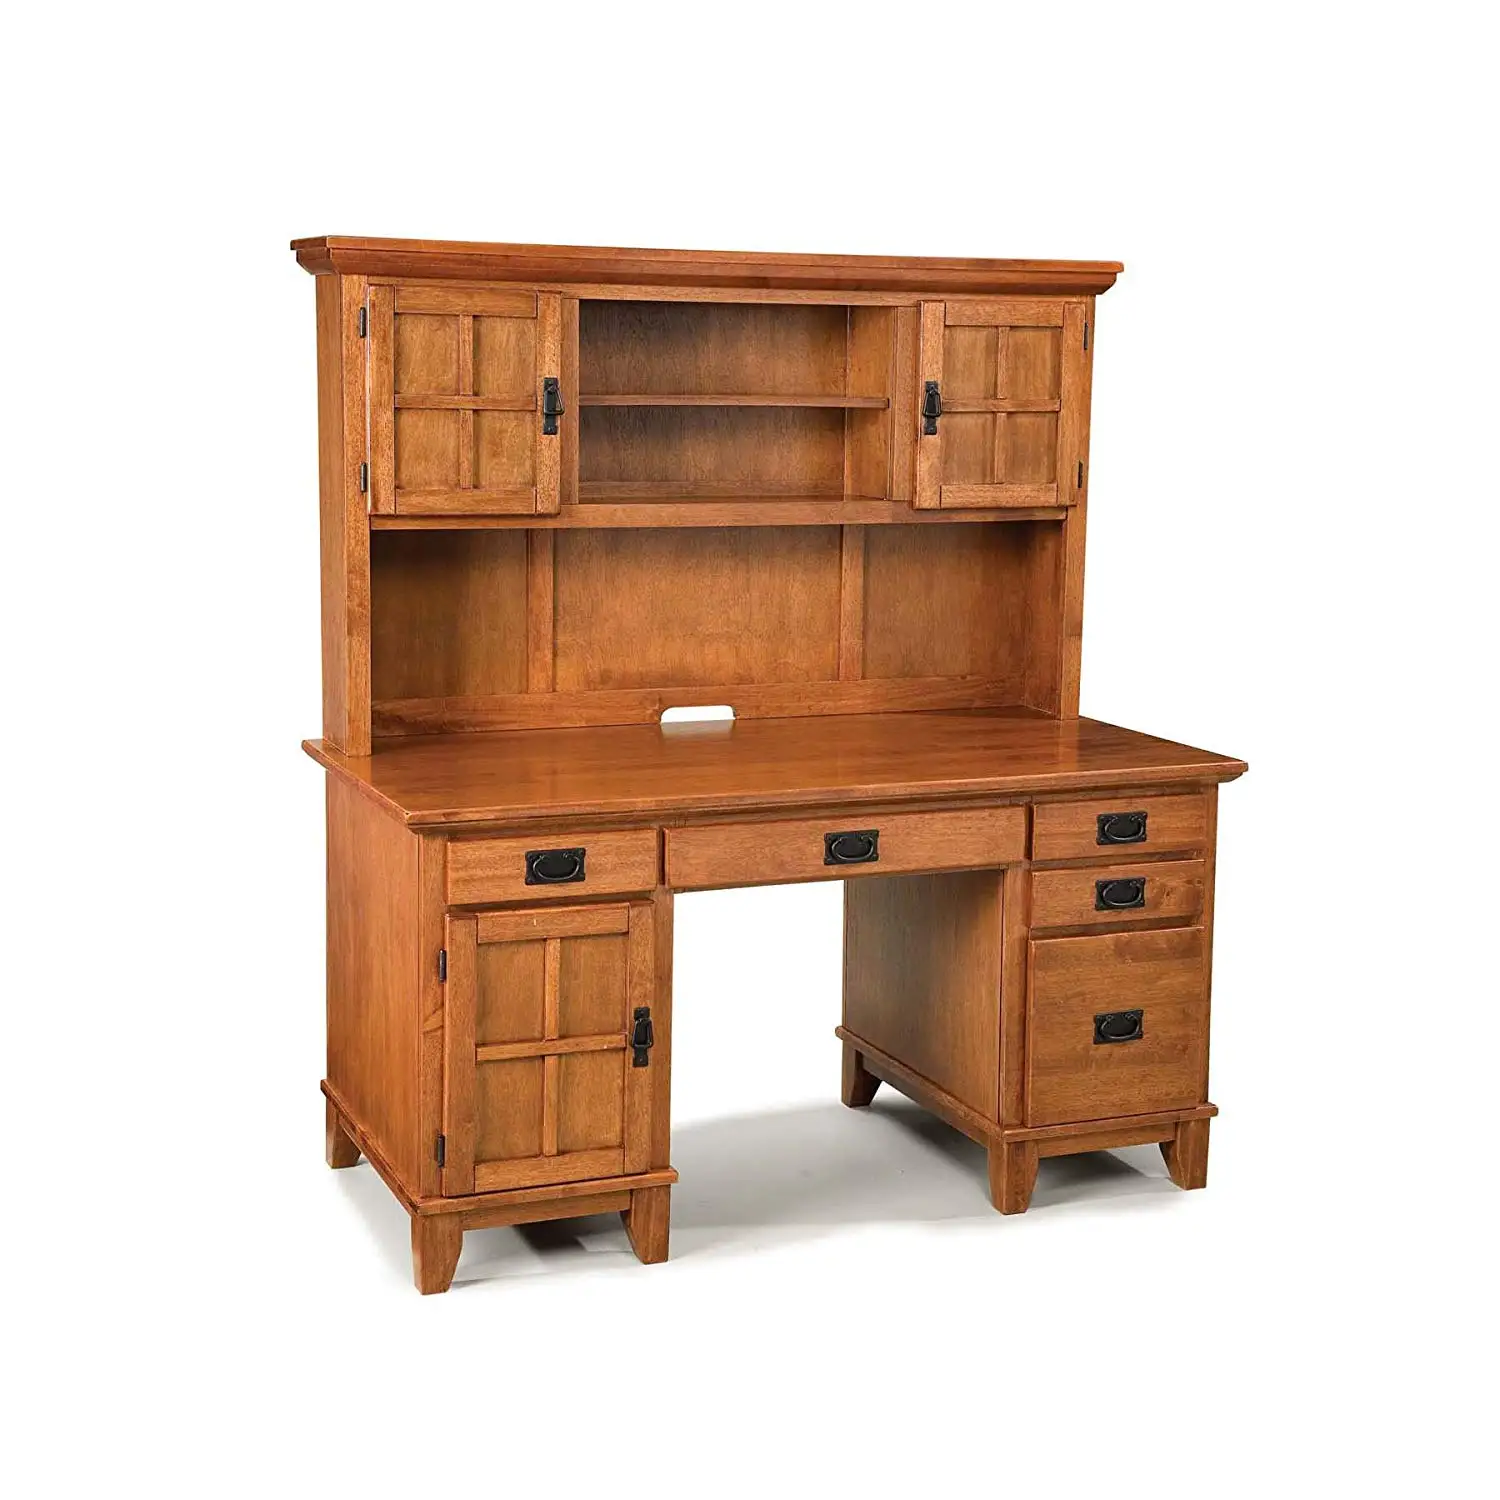 Cheap Desk And Hutch Set Find Desk And Hutch Set Deals On Line At